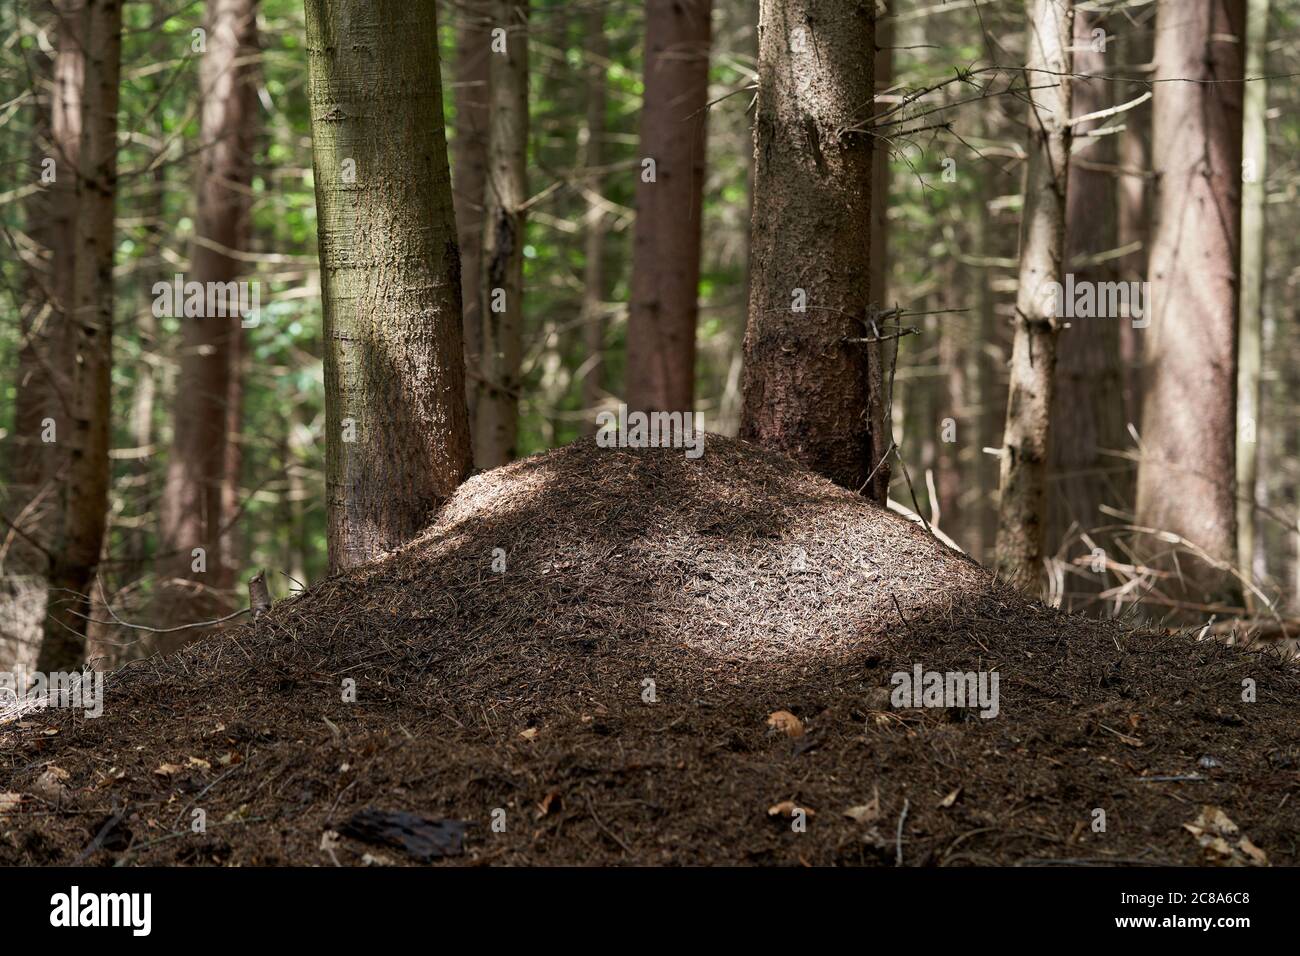 Large ant nest of Formica rufa species in the spruce forest. Spruce trees in background. Stock Photo